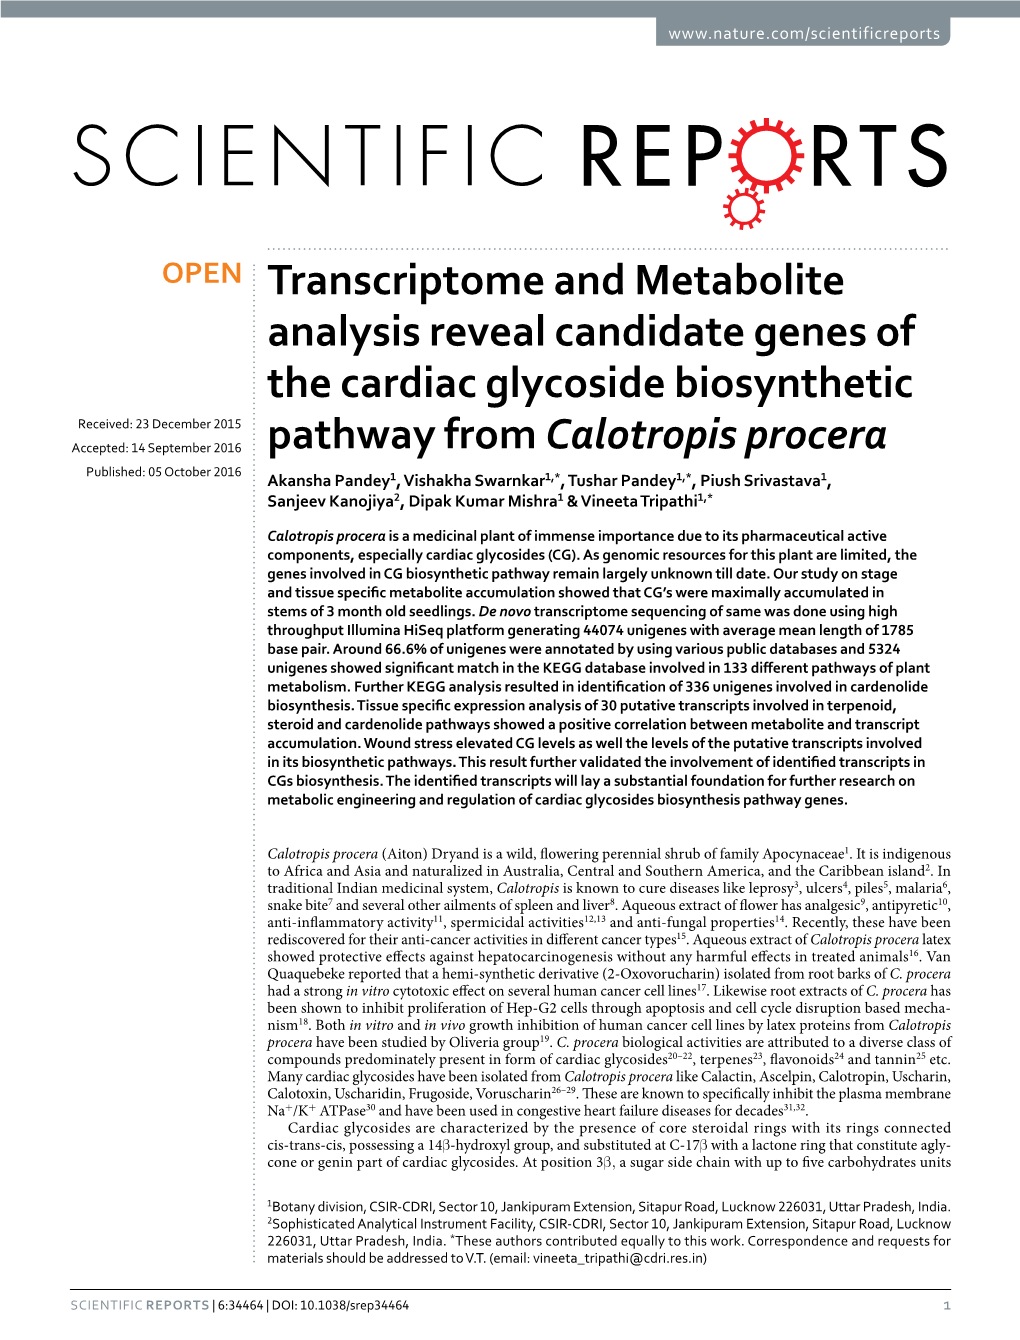 Transcriptome and Metabolite Analysis Reveal Candidate Genes Of